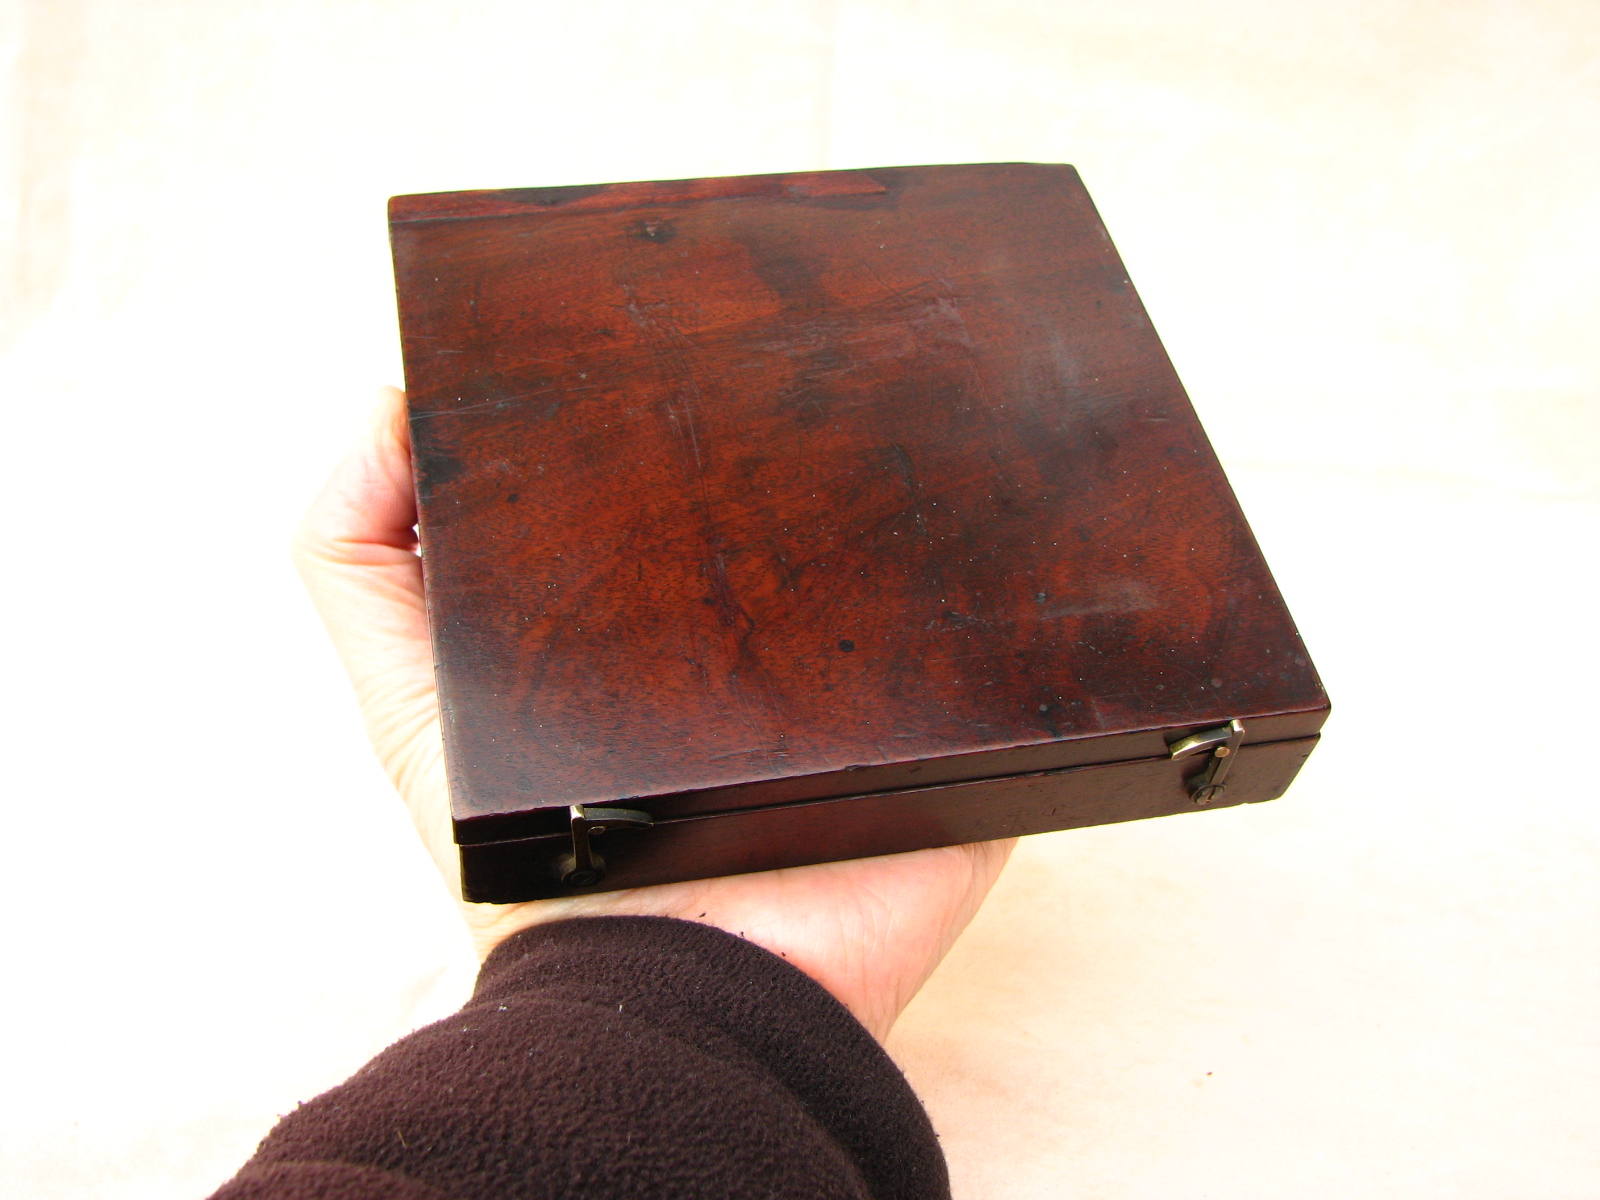 Large 19th century Dollond mahogany cased surveyors compass